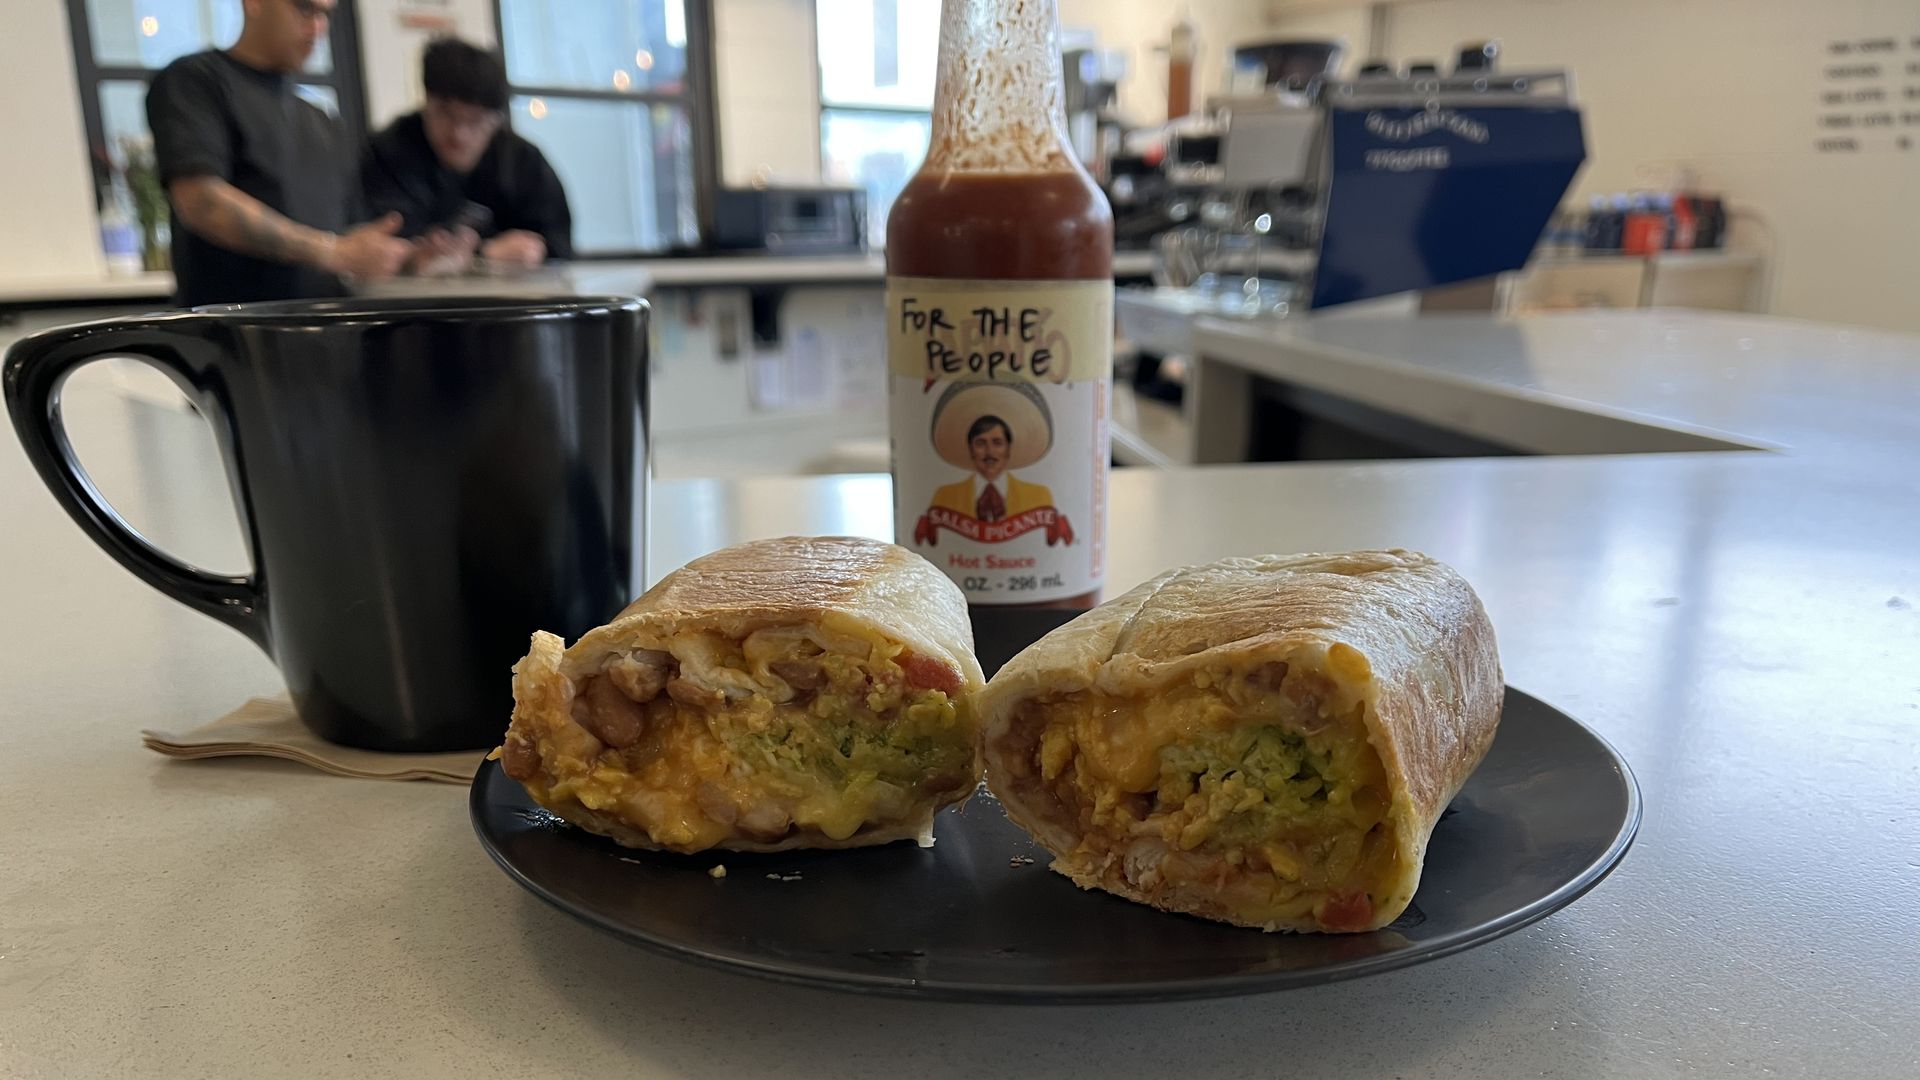 The burrito sits on a plate with coffee and hot sauce next to it.